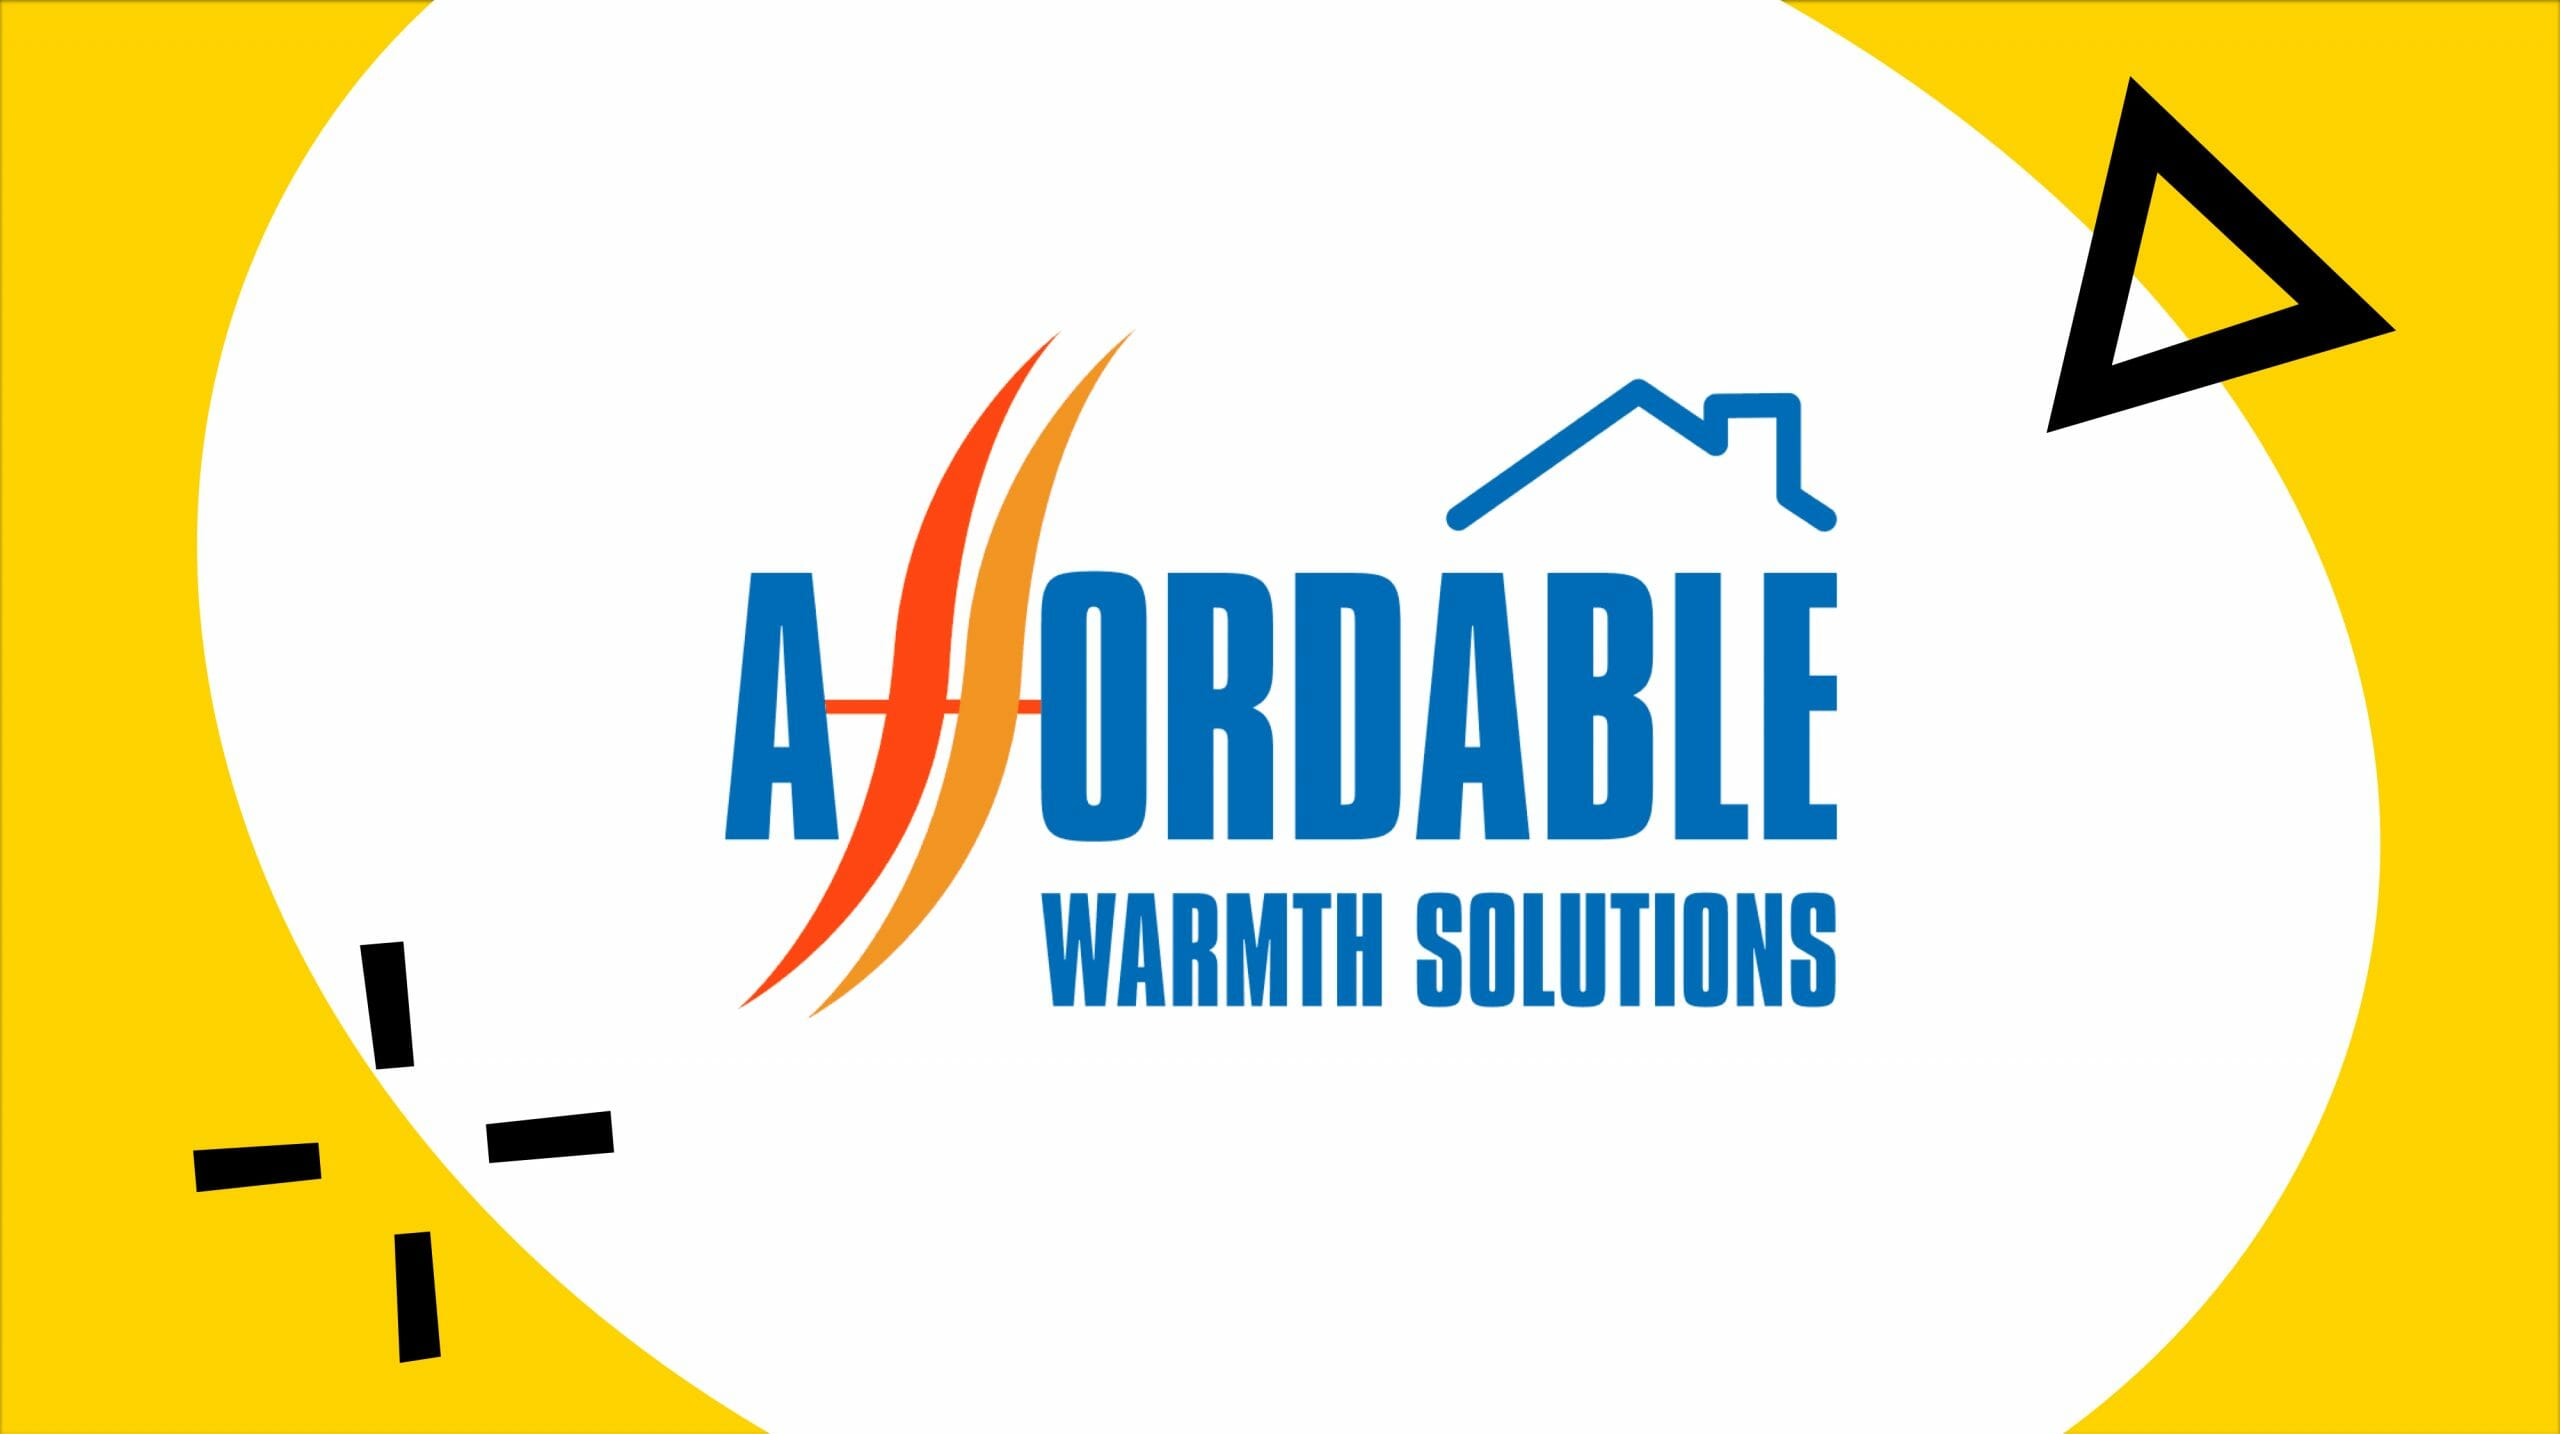 Fuel Bank Foundation extends partnership with National Grid and Affordable Warmth Solutions Featured Image